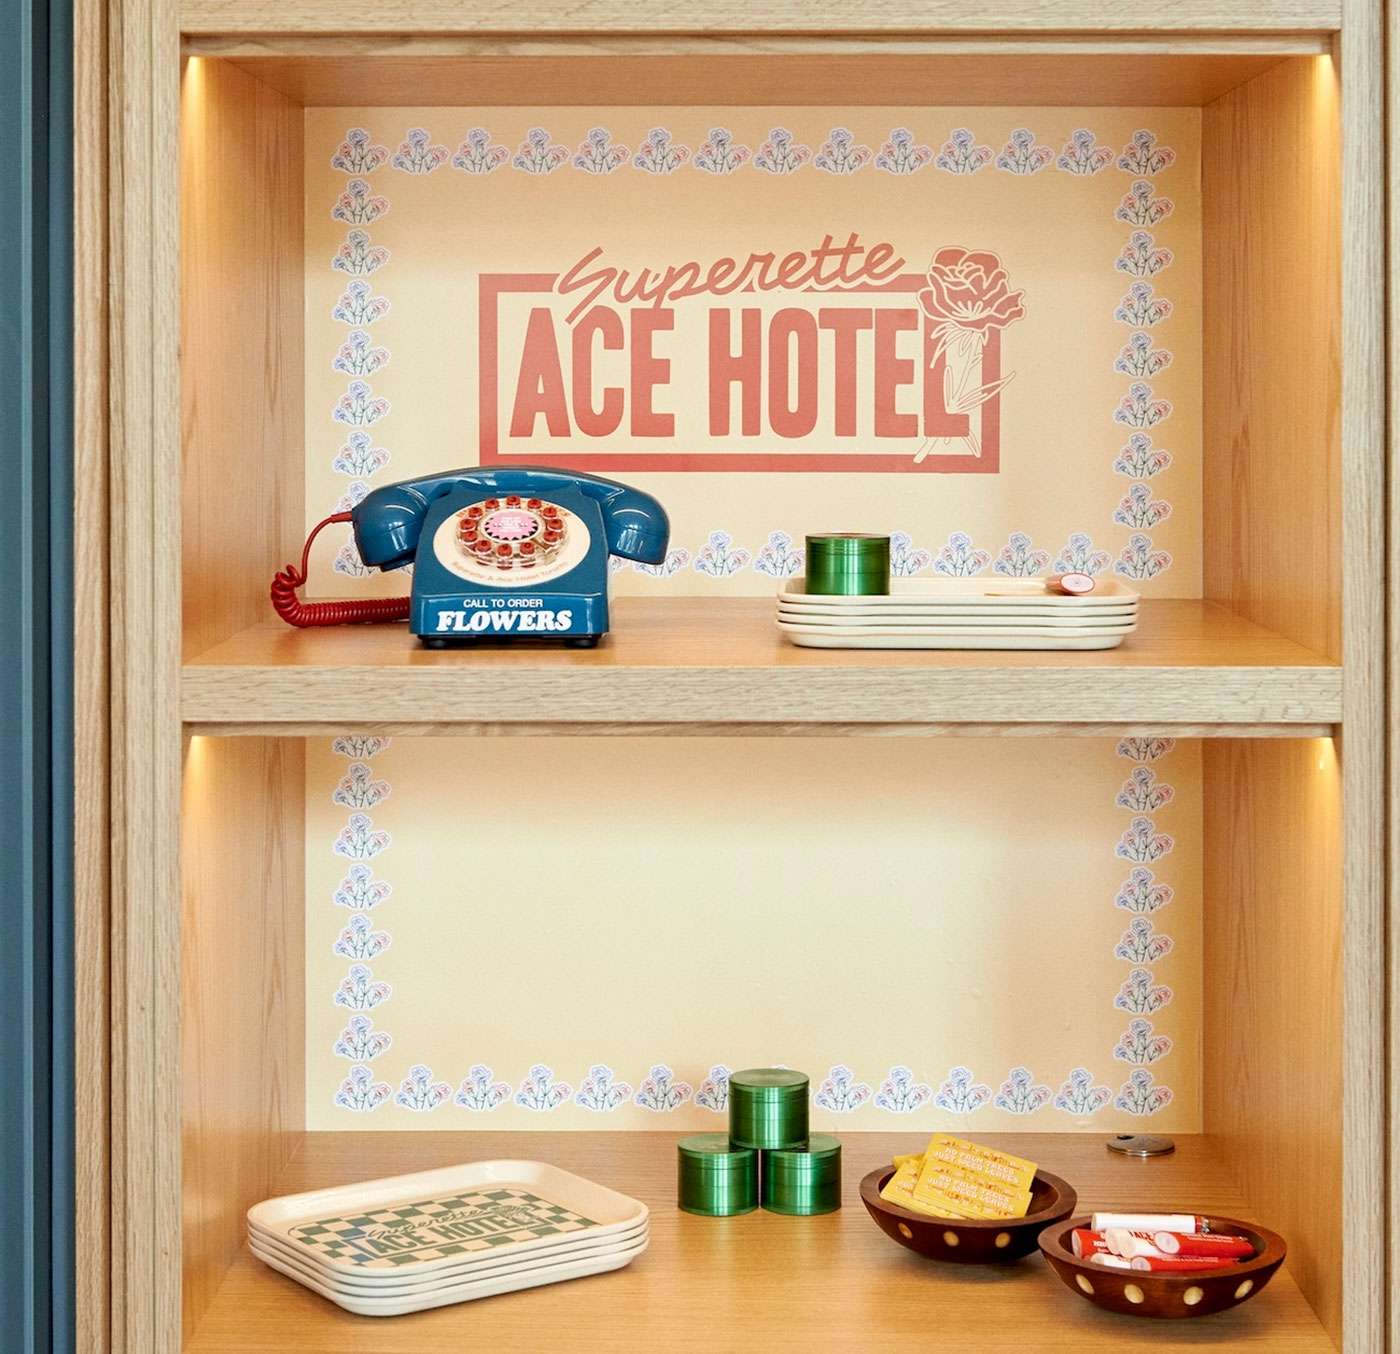 Superette Ace Hotel collection